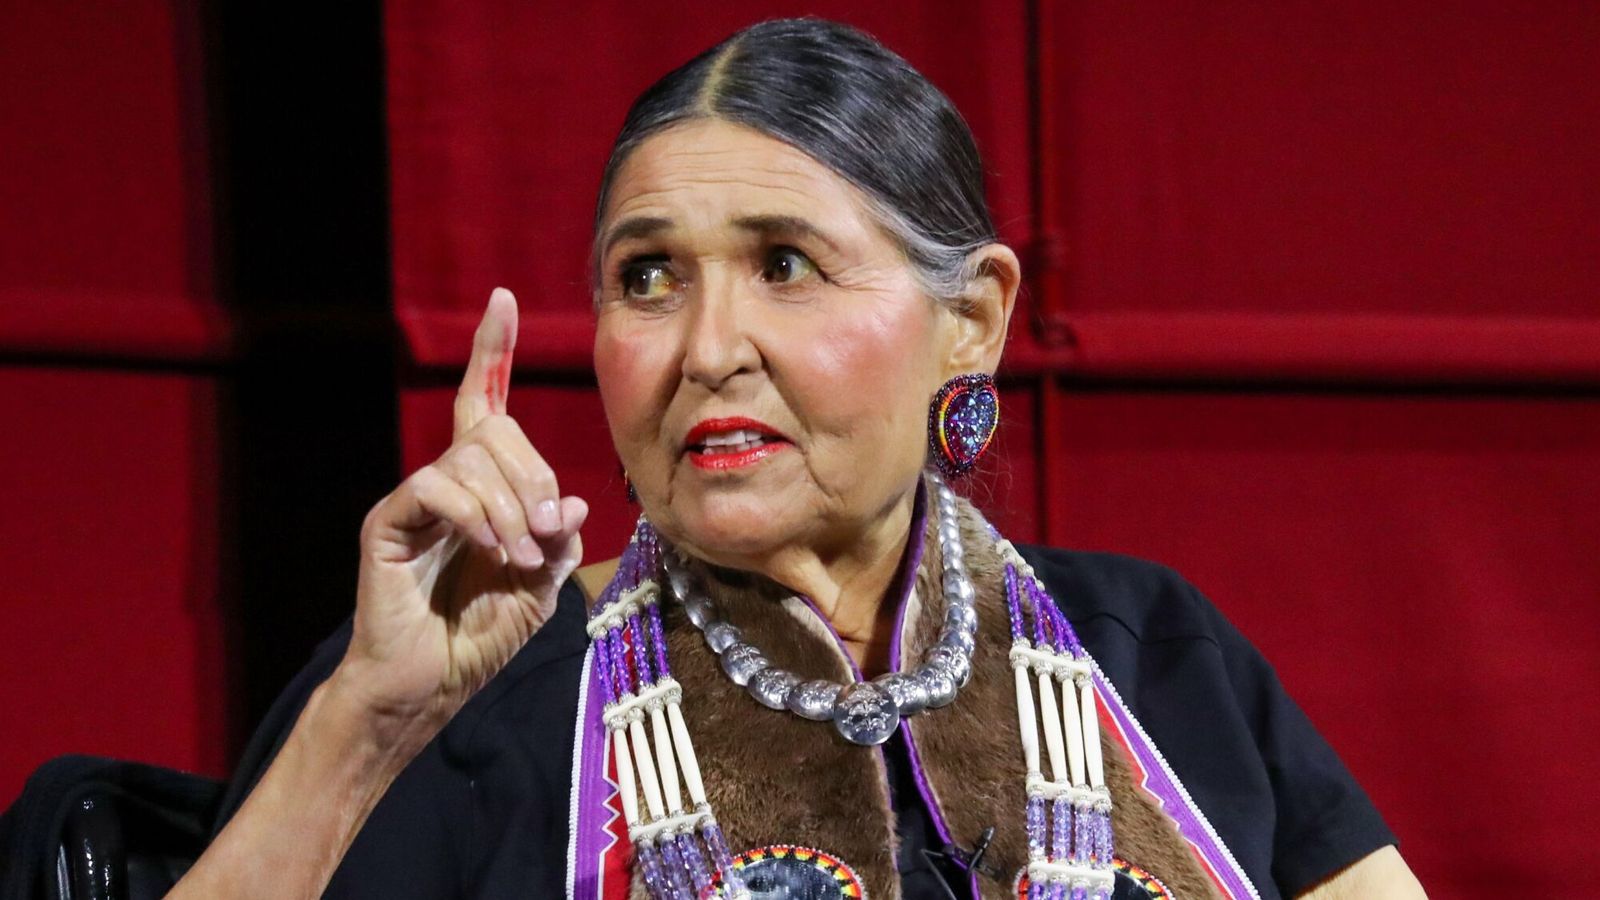 Sacheen Littlefeather, famous for declining Marlon Brando's Oscar, dies weeks after accepting Academy apology